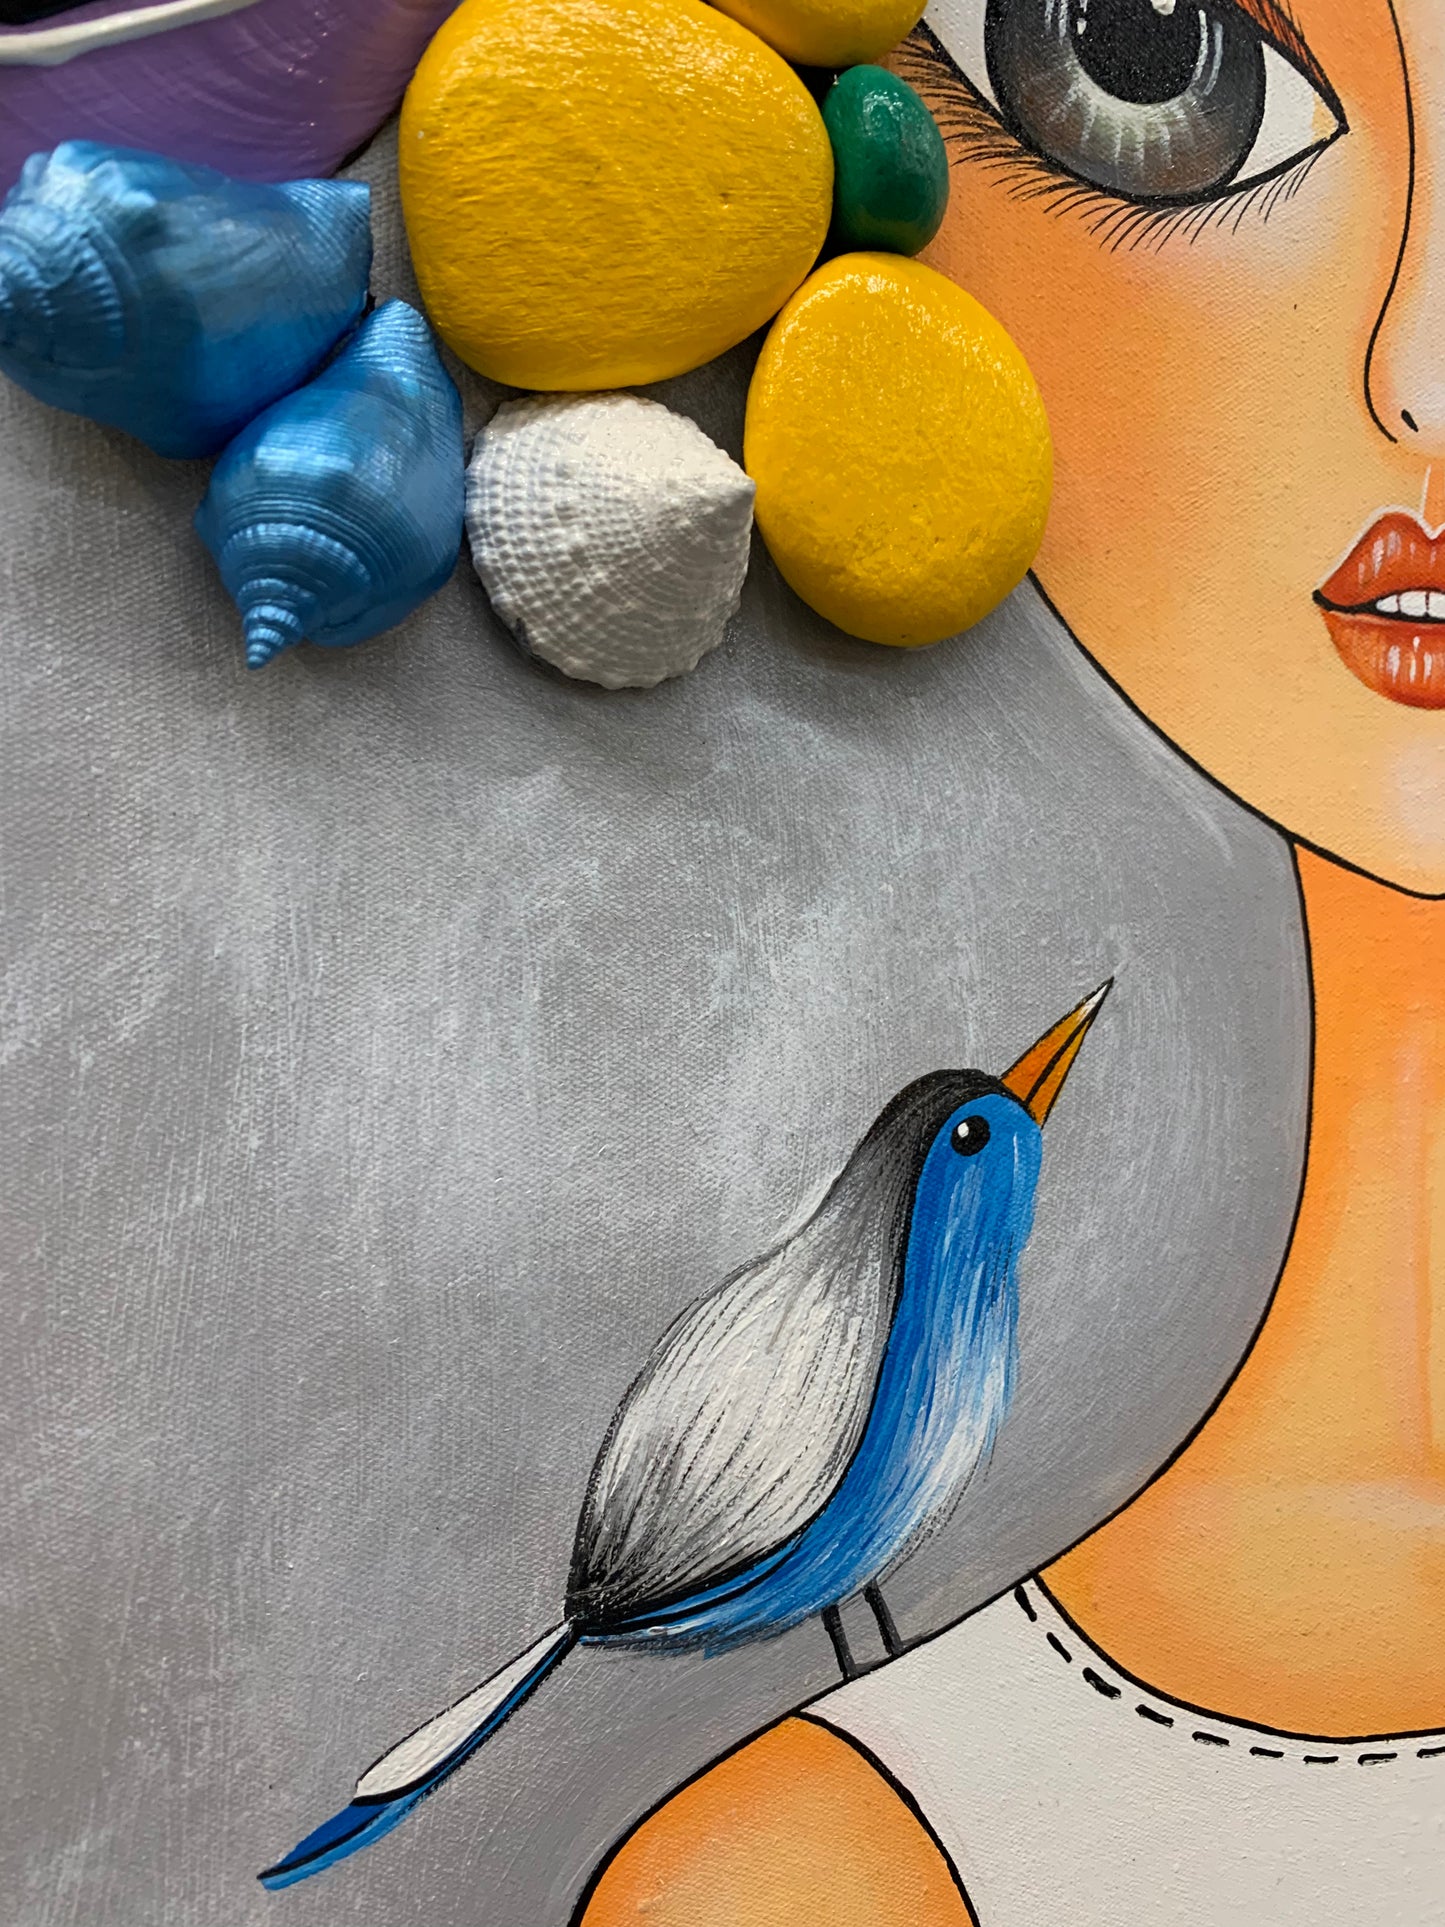 'Friend on my shoulder' - painting on canvas with crafted pebbles and seashells